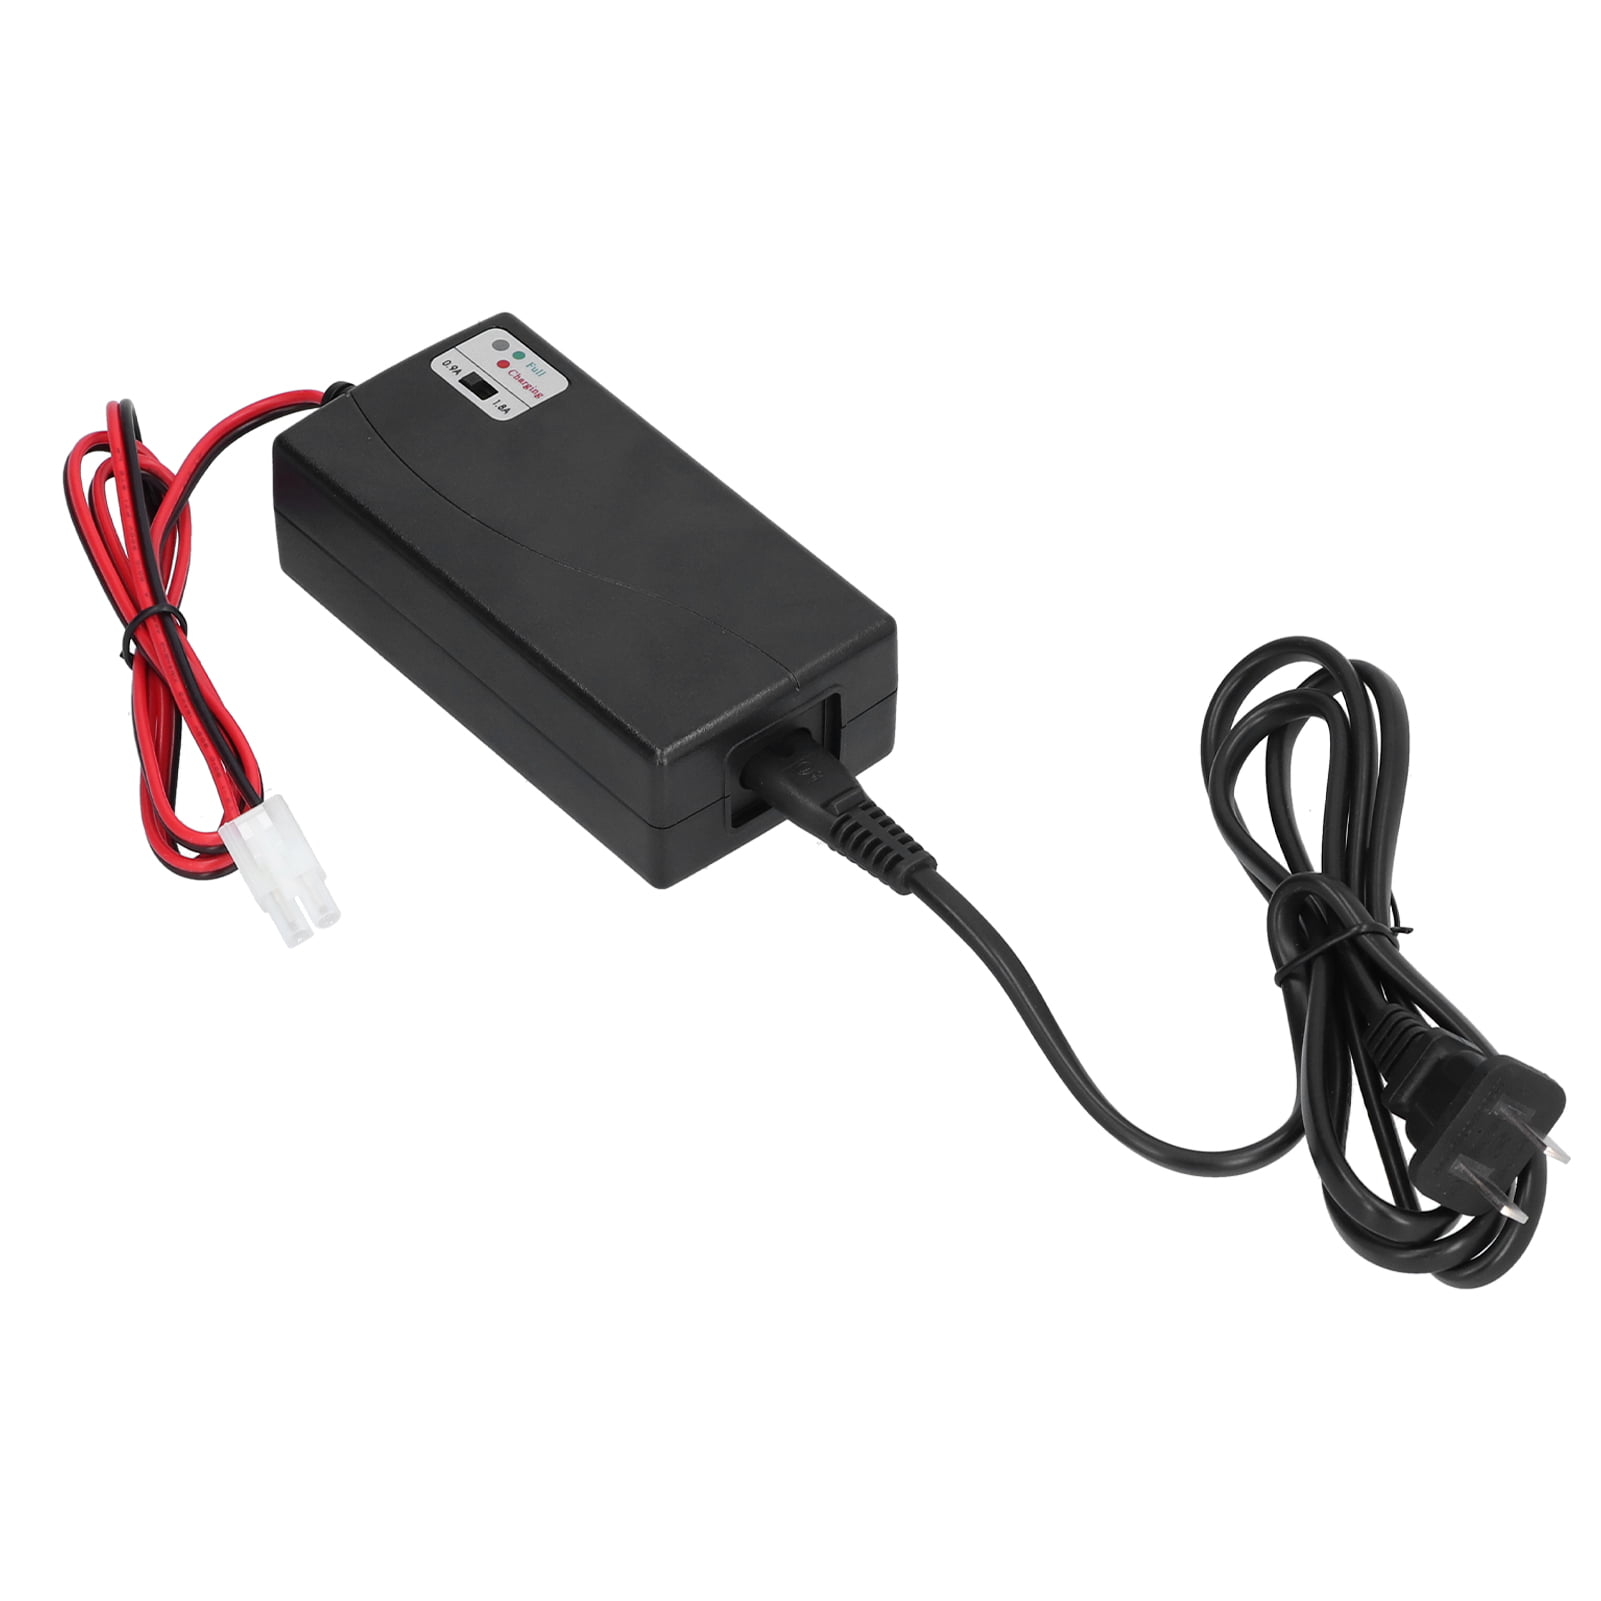 24 Volt Battery Charger For Disney Princess Carriag... 24V Power Wheels Charger 